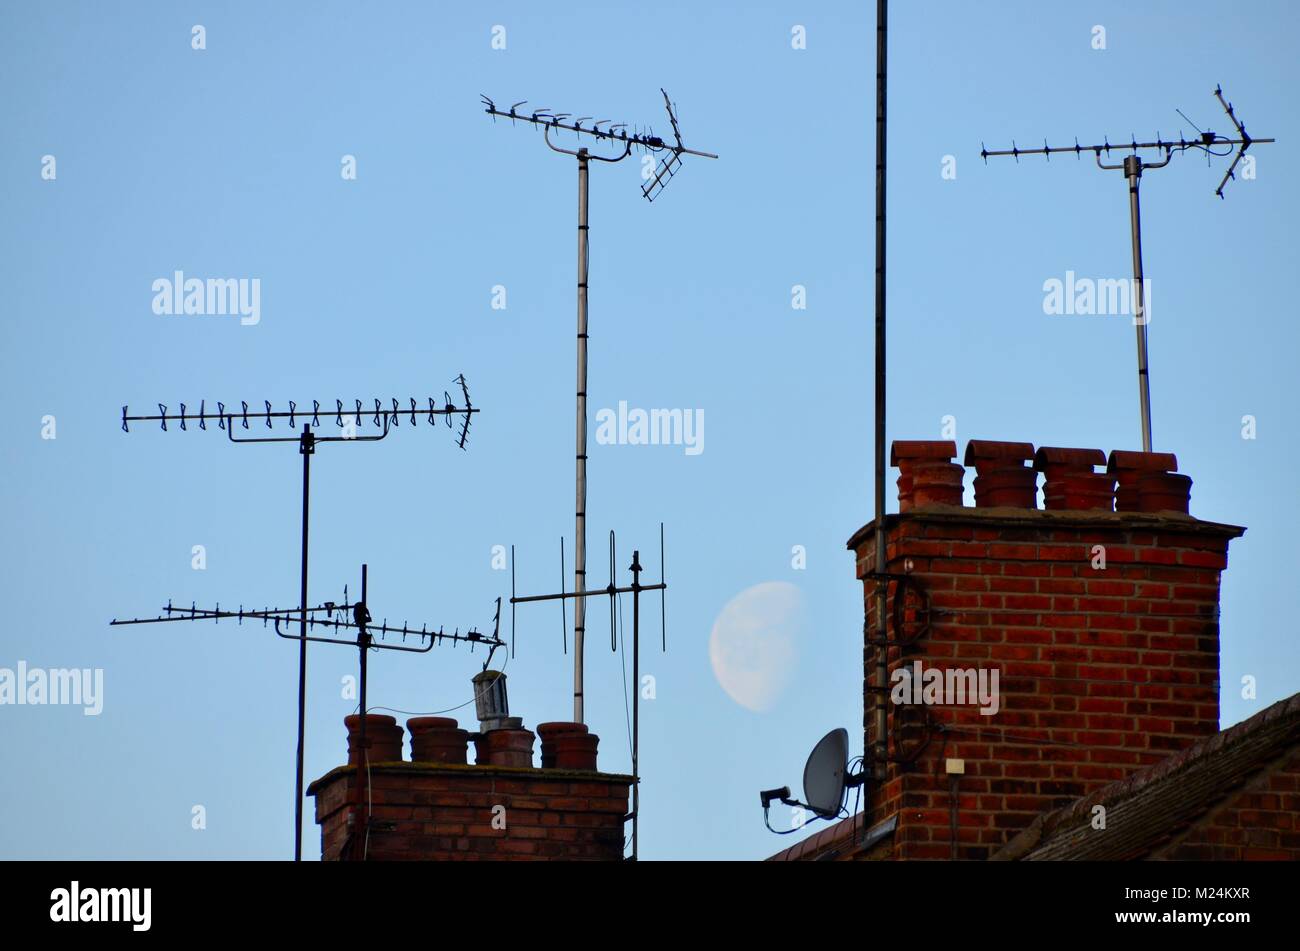 aerials and chimneys on london houses with a large moon behind Stock Photo